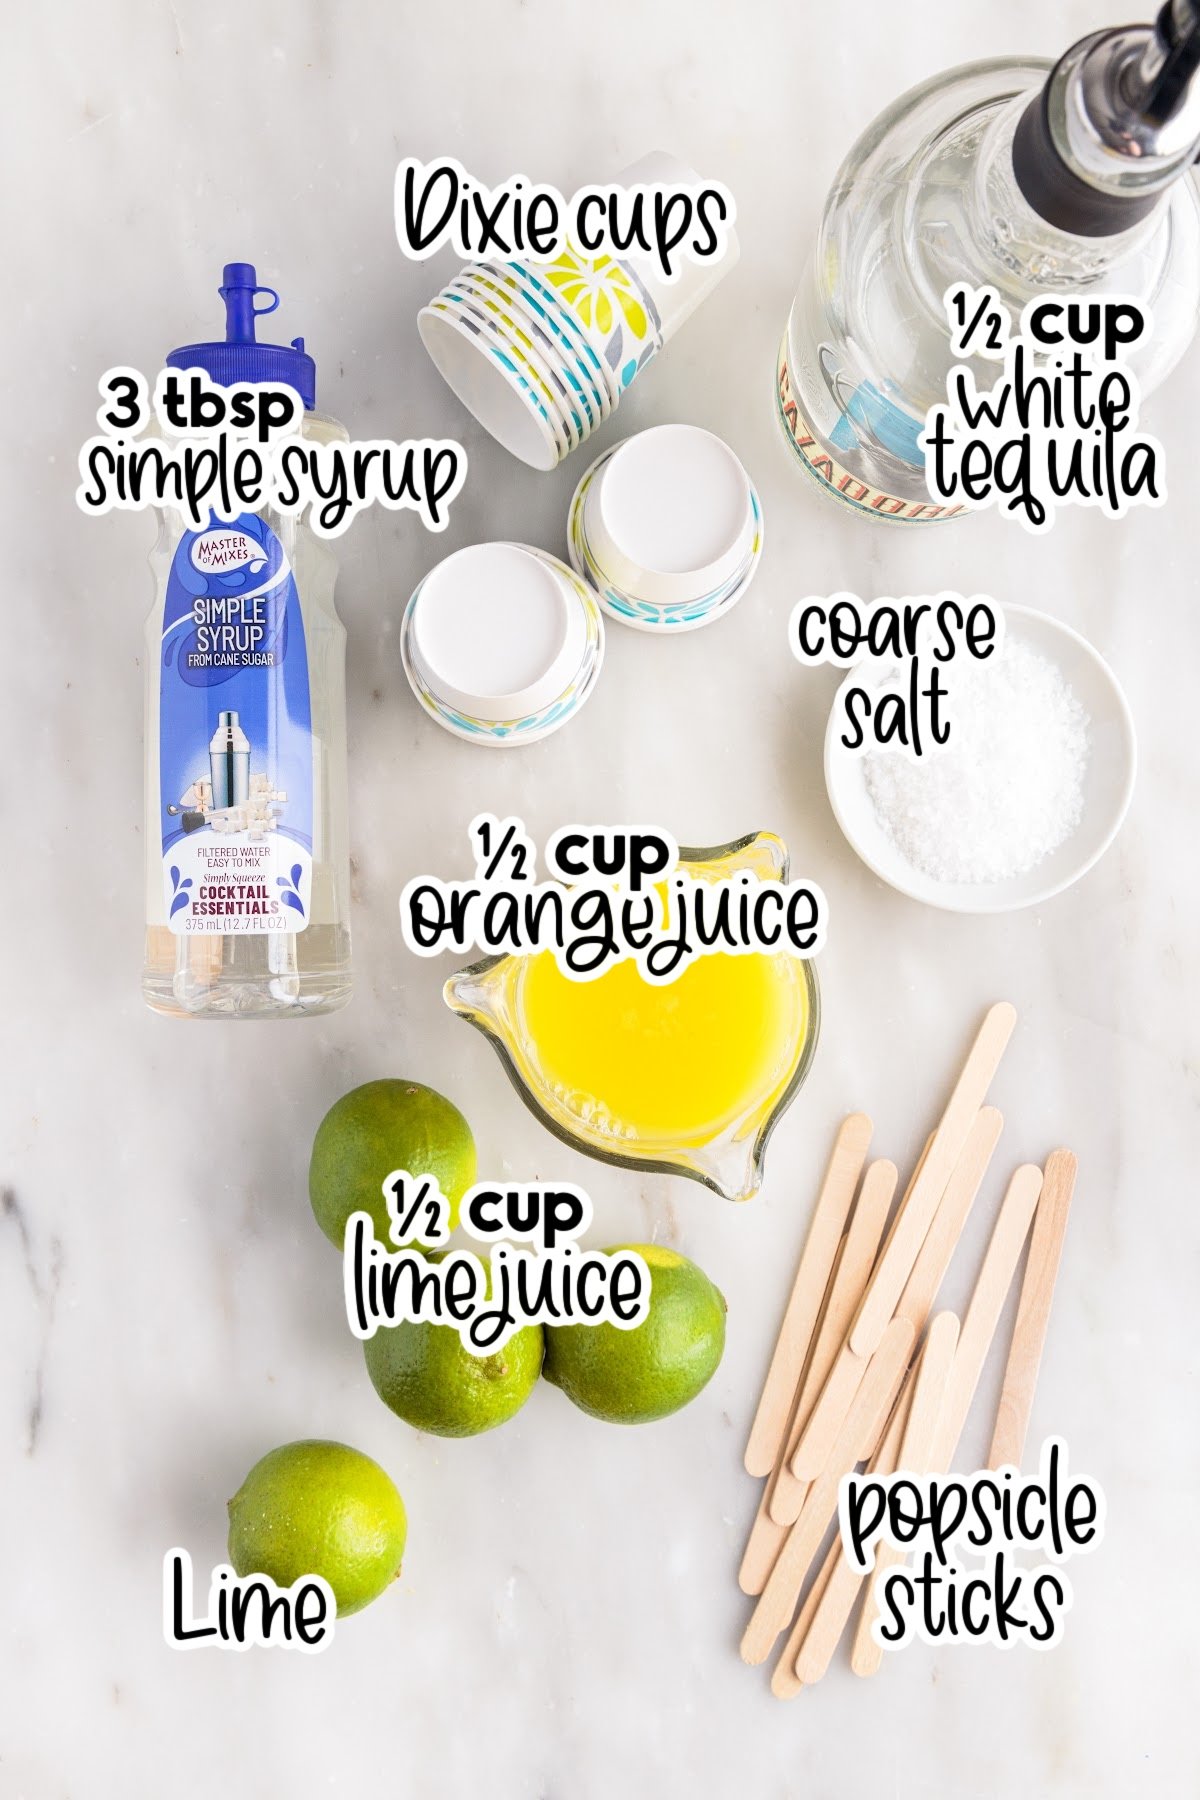 Individual ingredients for margarita popsicles with text and amount labels: limes, popsicle sticks, simple syrup, salt, orange juice, tequila, and Dixie cups.